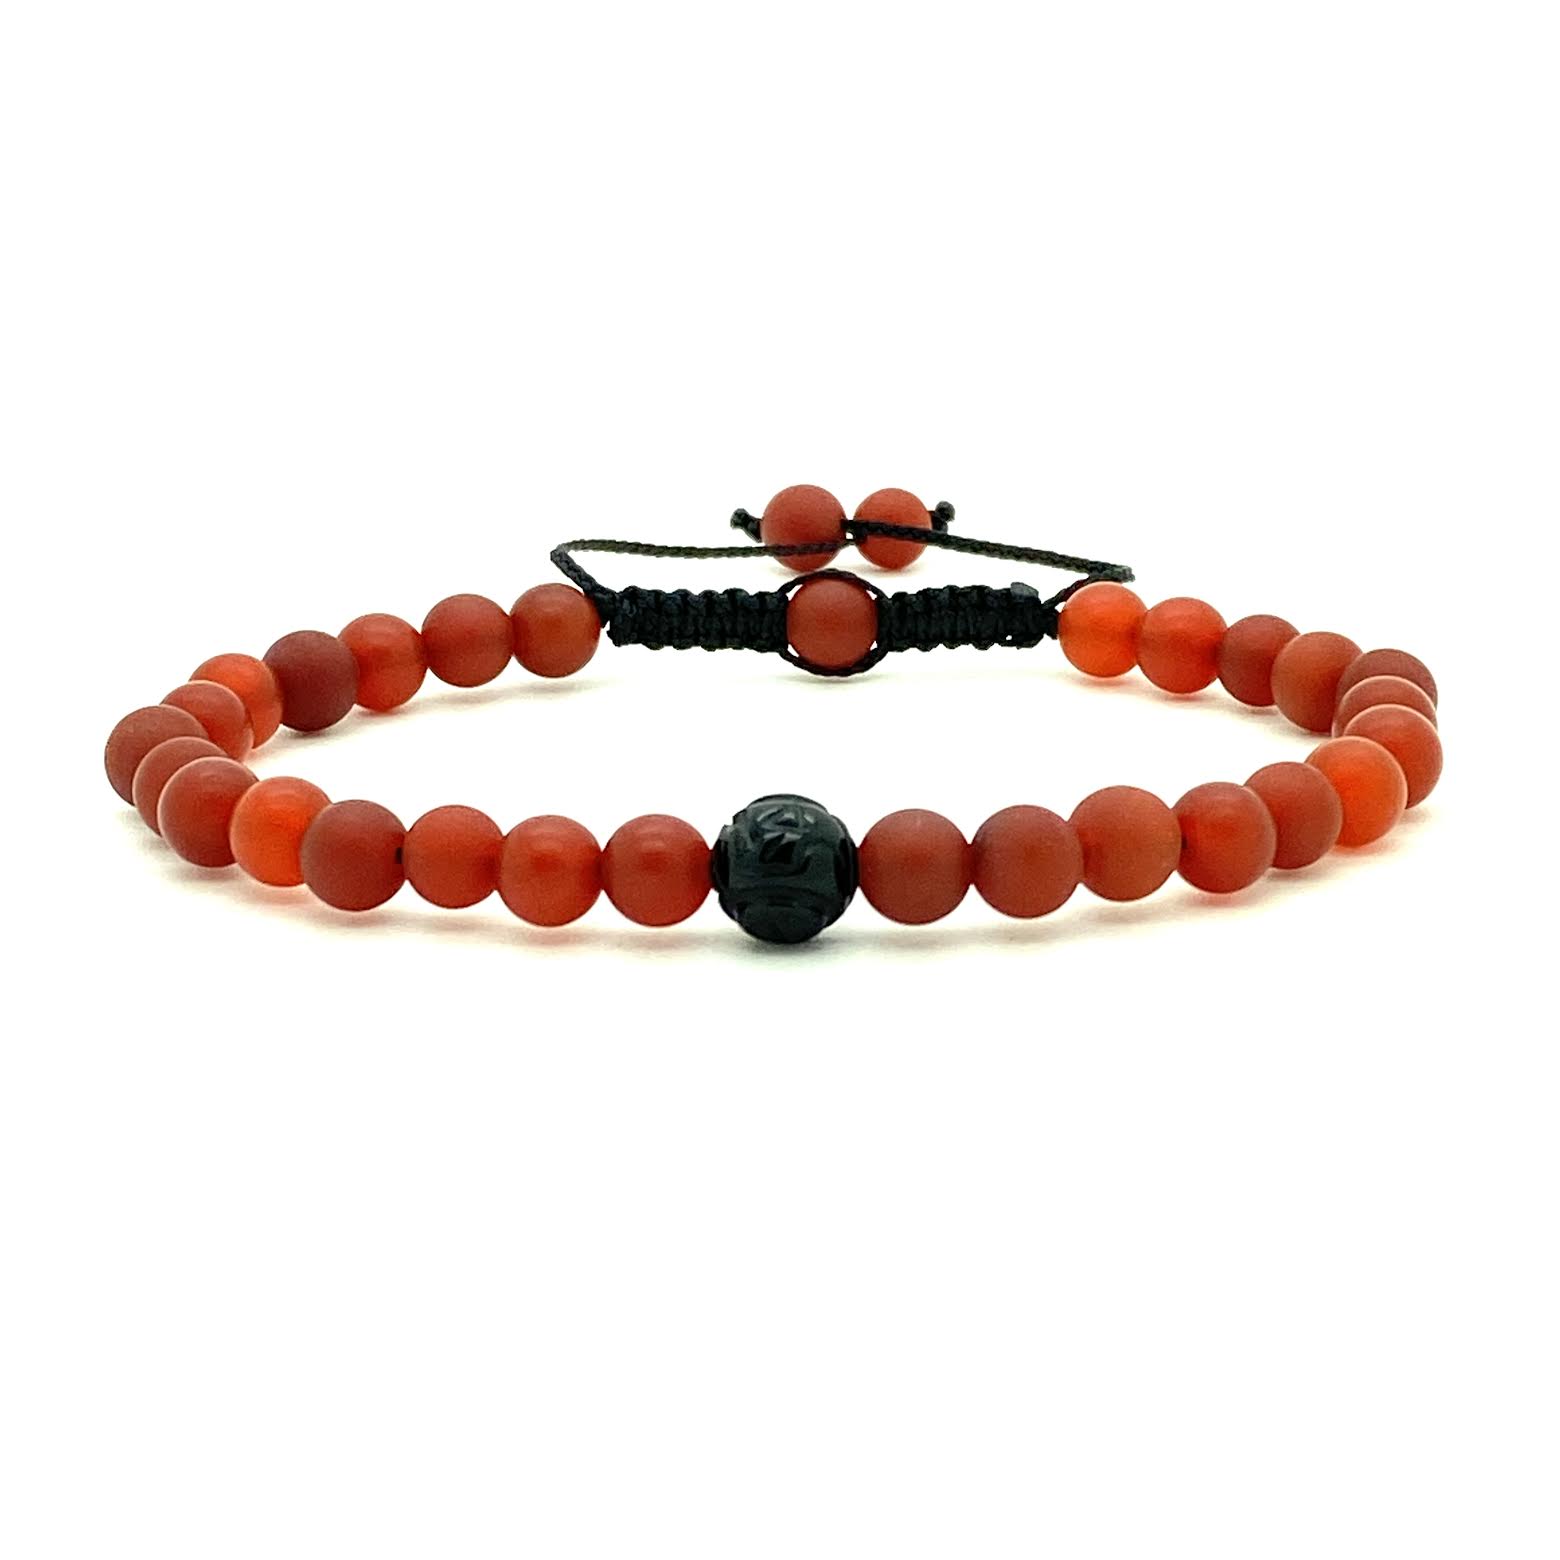 Carnelian symbolizes bold energy, warmth, and a joy that lingers. This popular matte beaded bracelet is accented with a single carved black onyx dragon bead for a cool, confident look. Hand knotted adjustable cord for a perfect fit. Made by WristBend